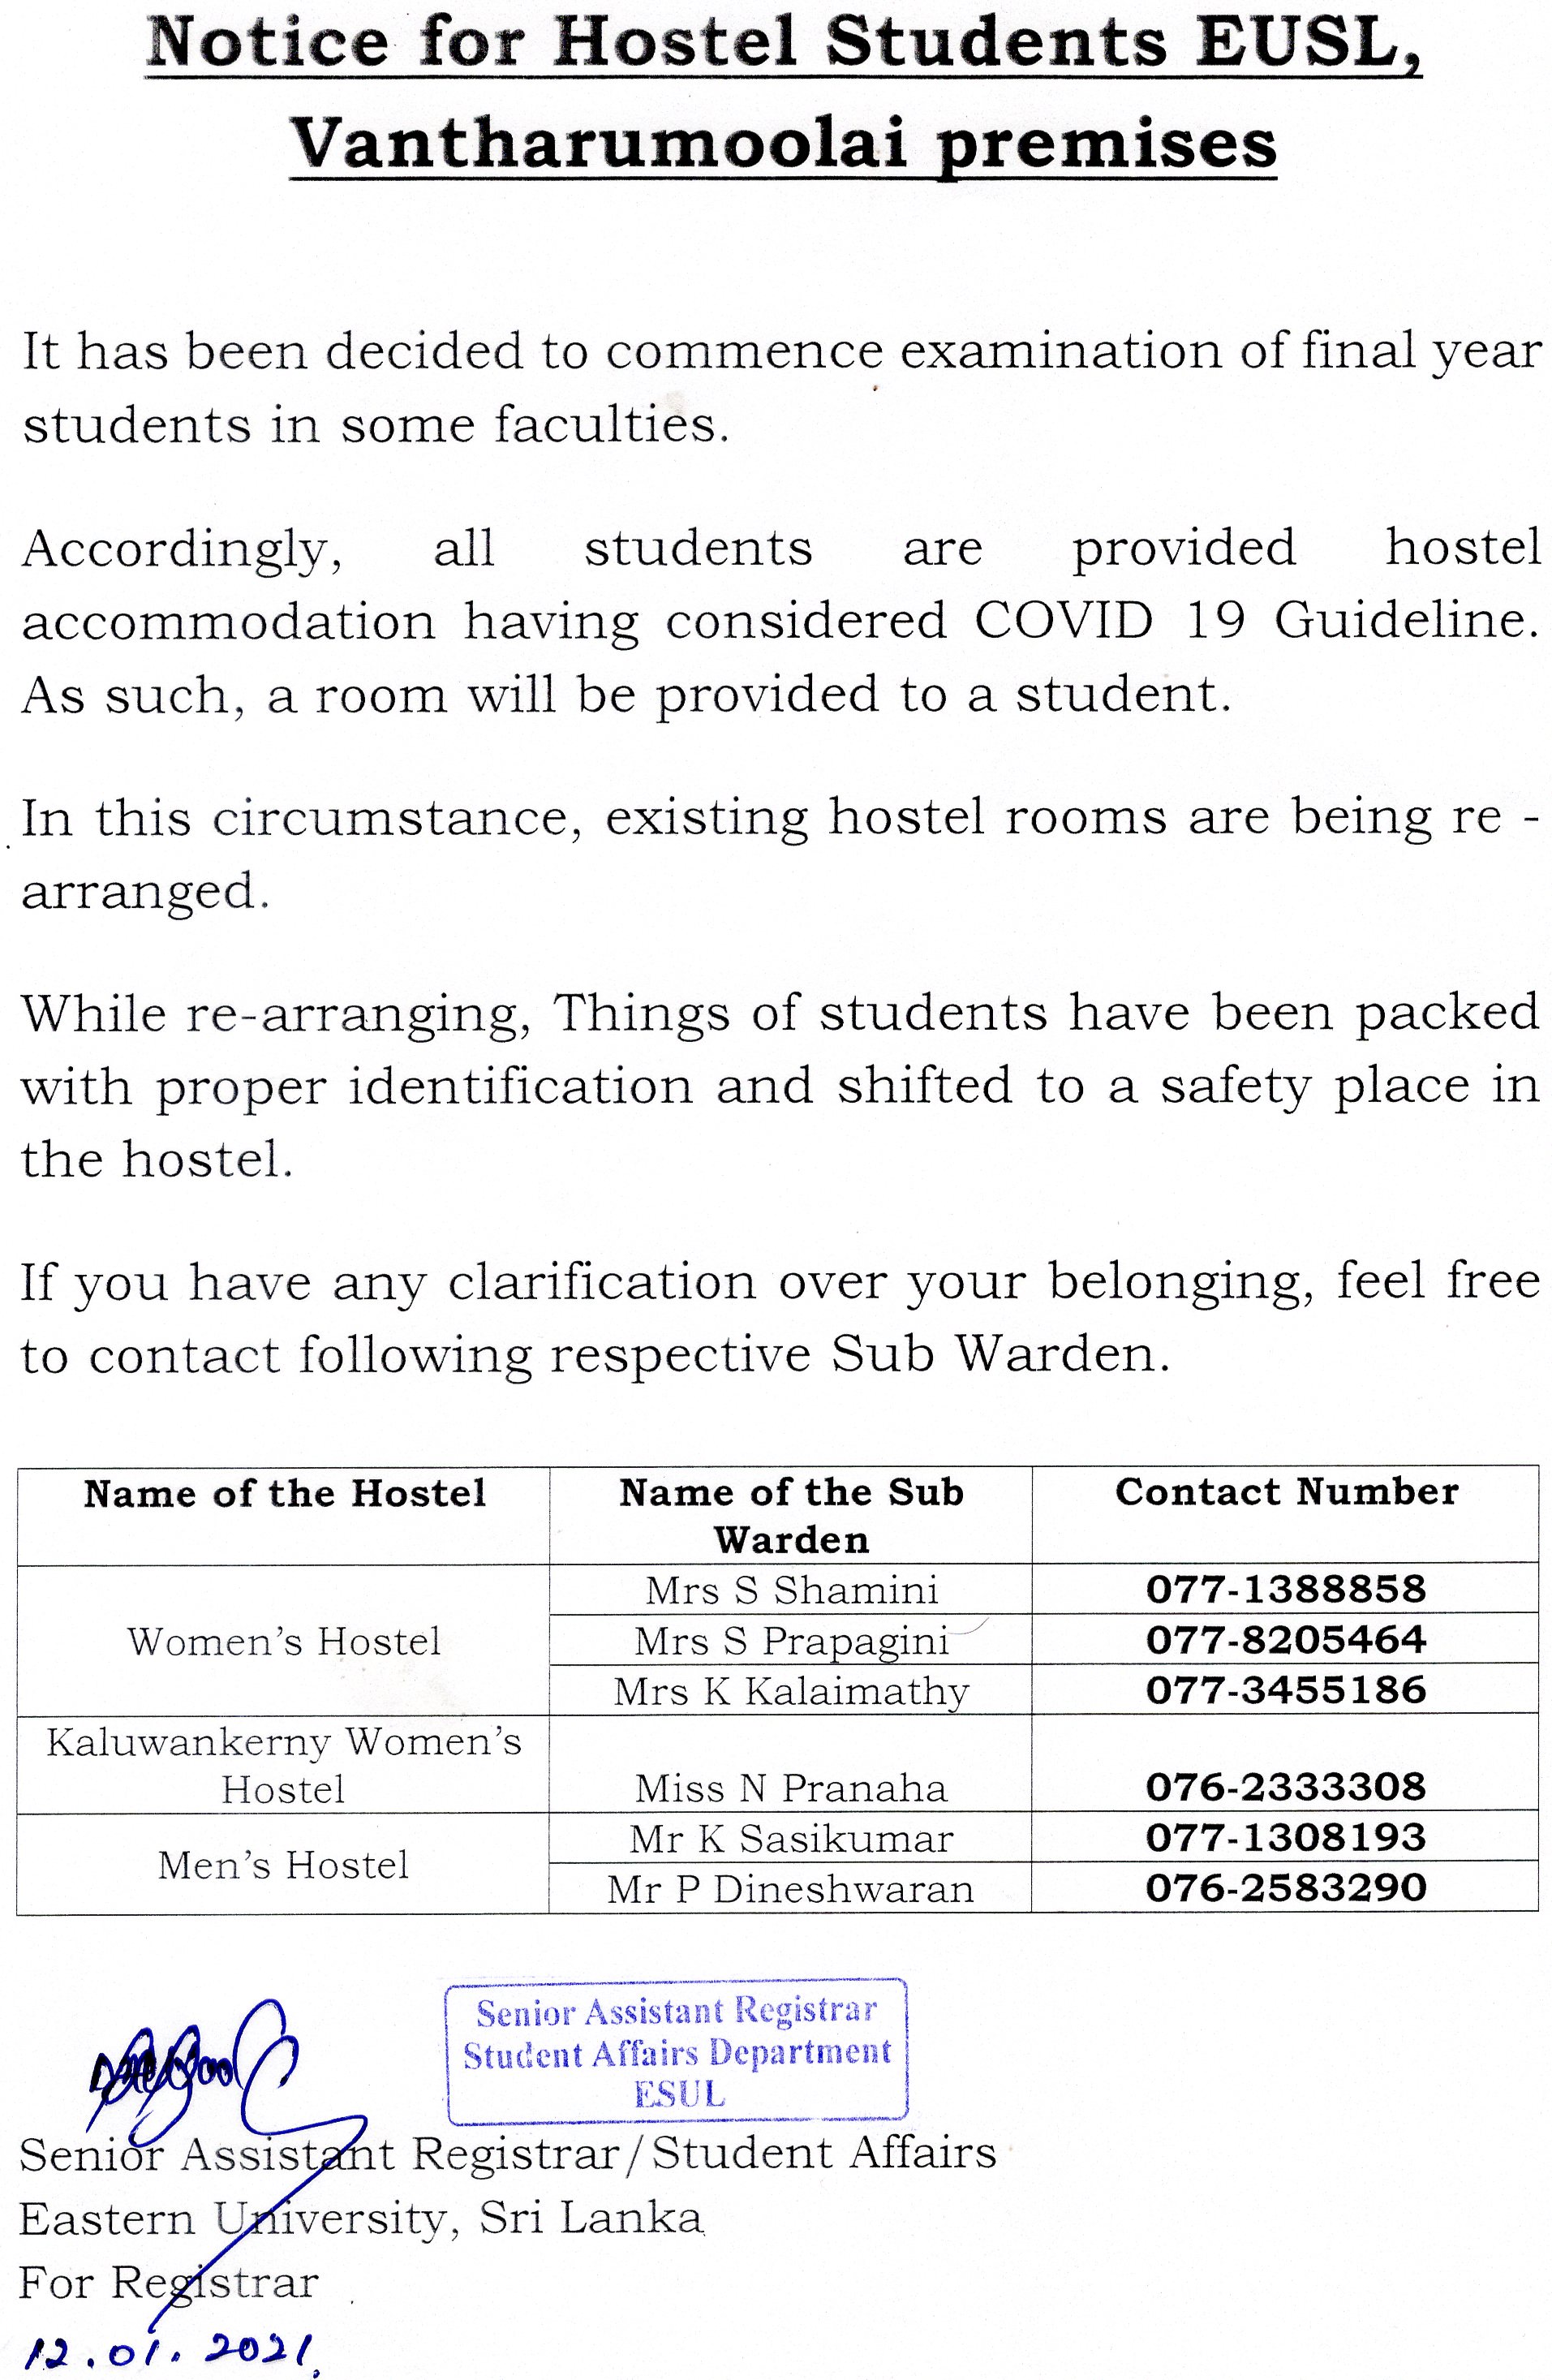 Notice for hostel students